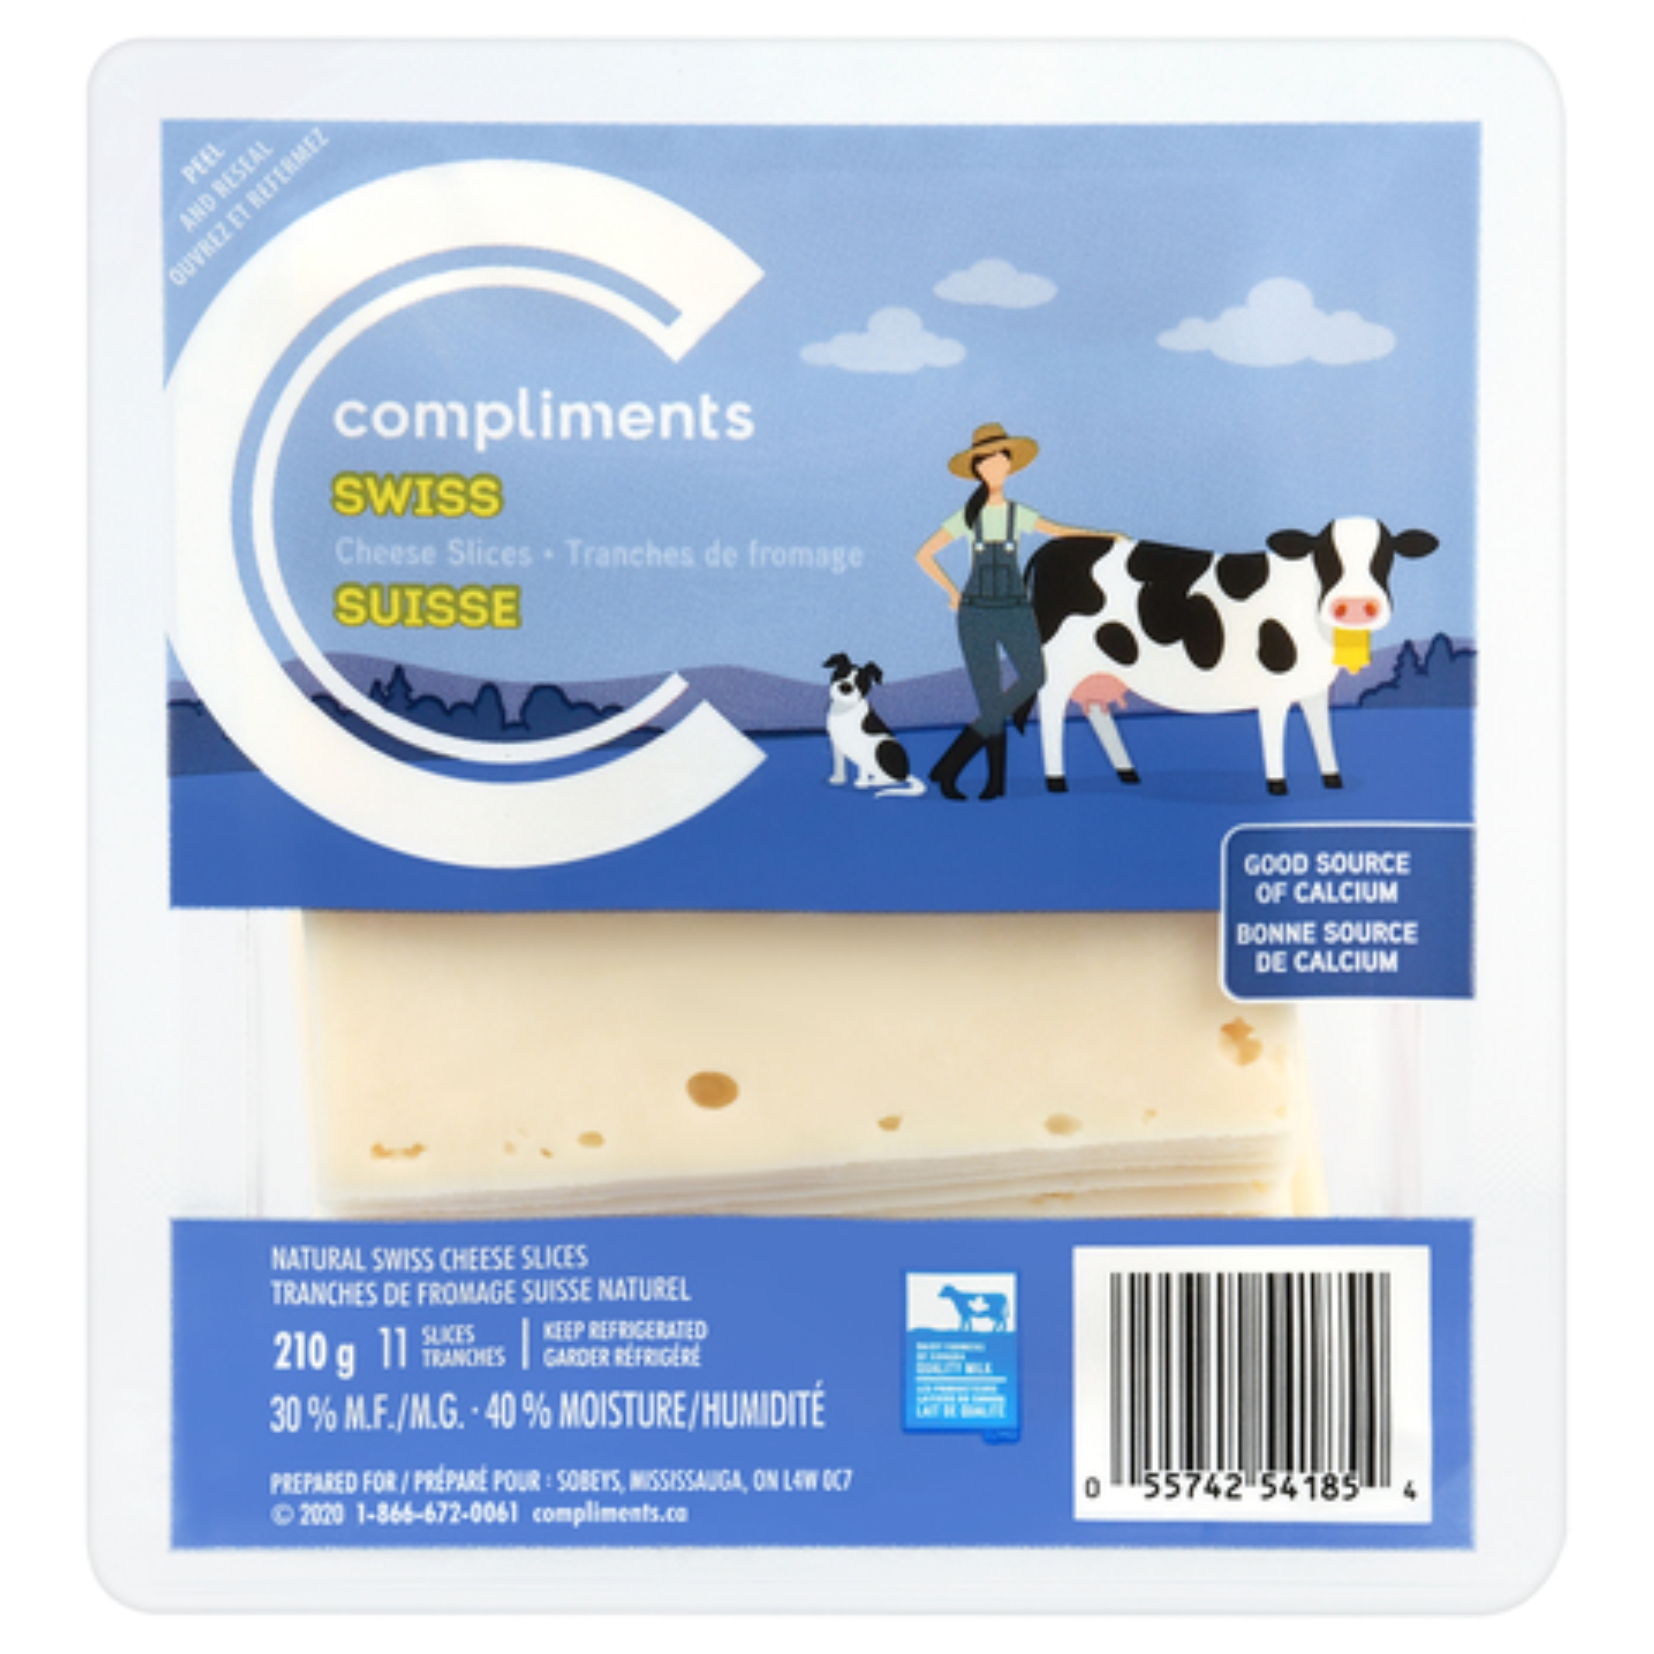 Compliments Swiss Cheese Slices 210g